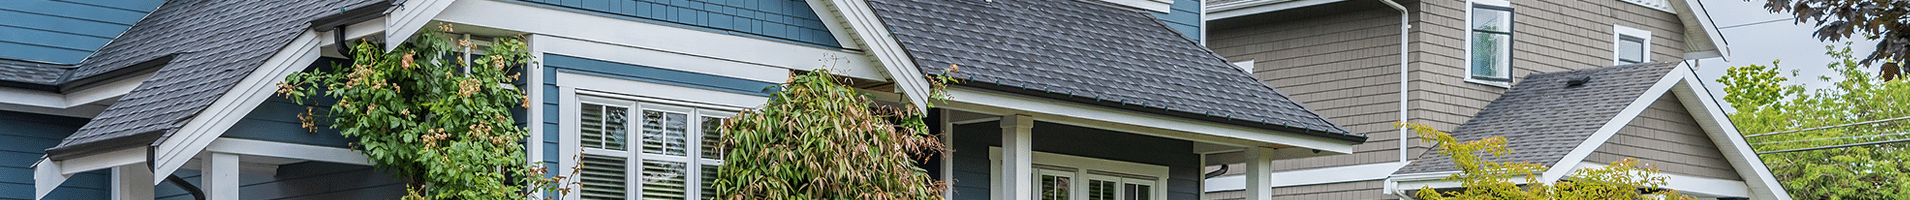 FloGutters LLC Trusted Gutter Services in New Smyrna Beach